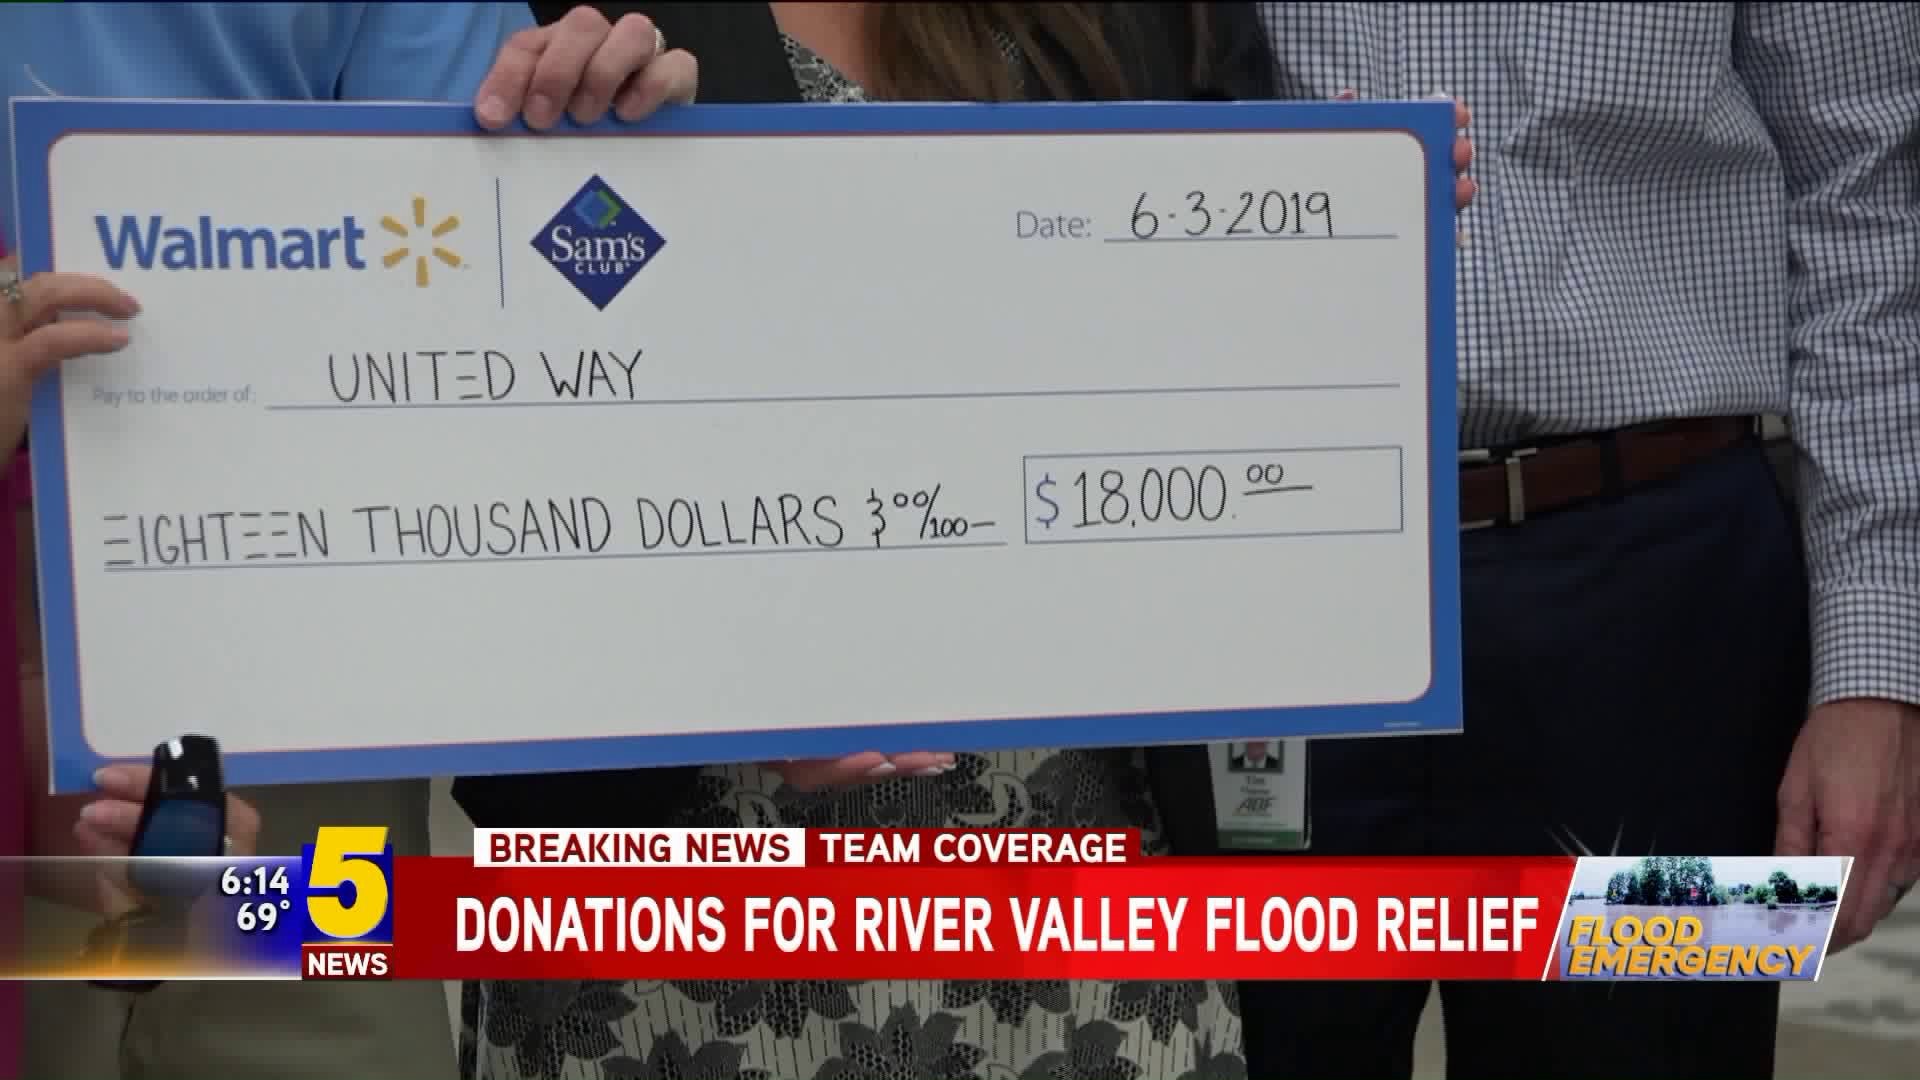 Donations for River Valley Flood Relief